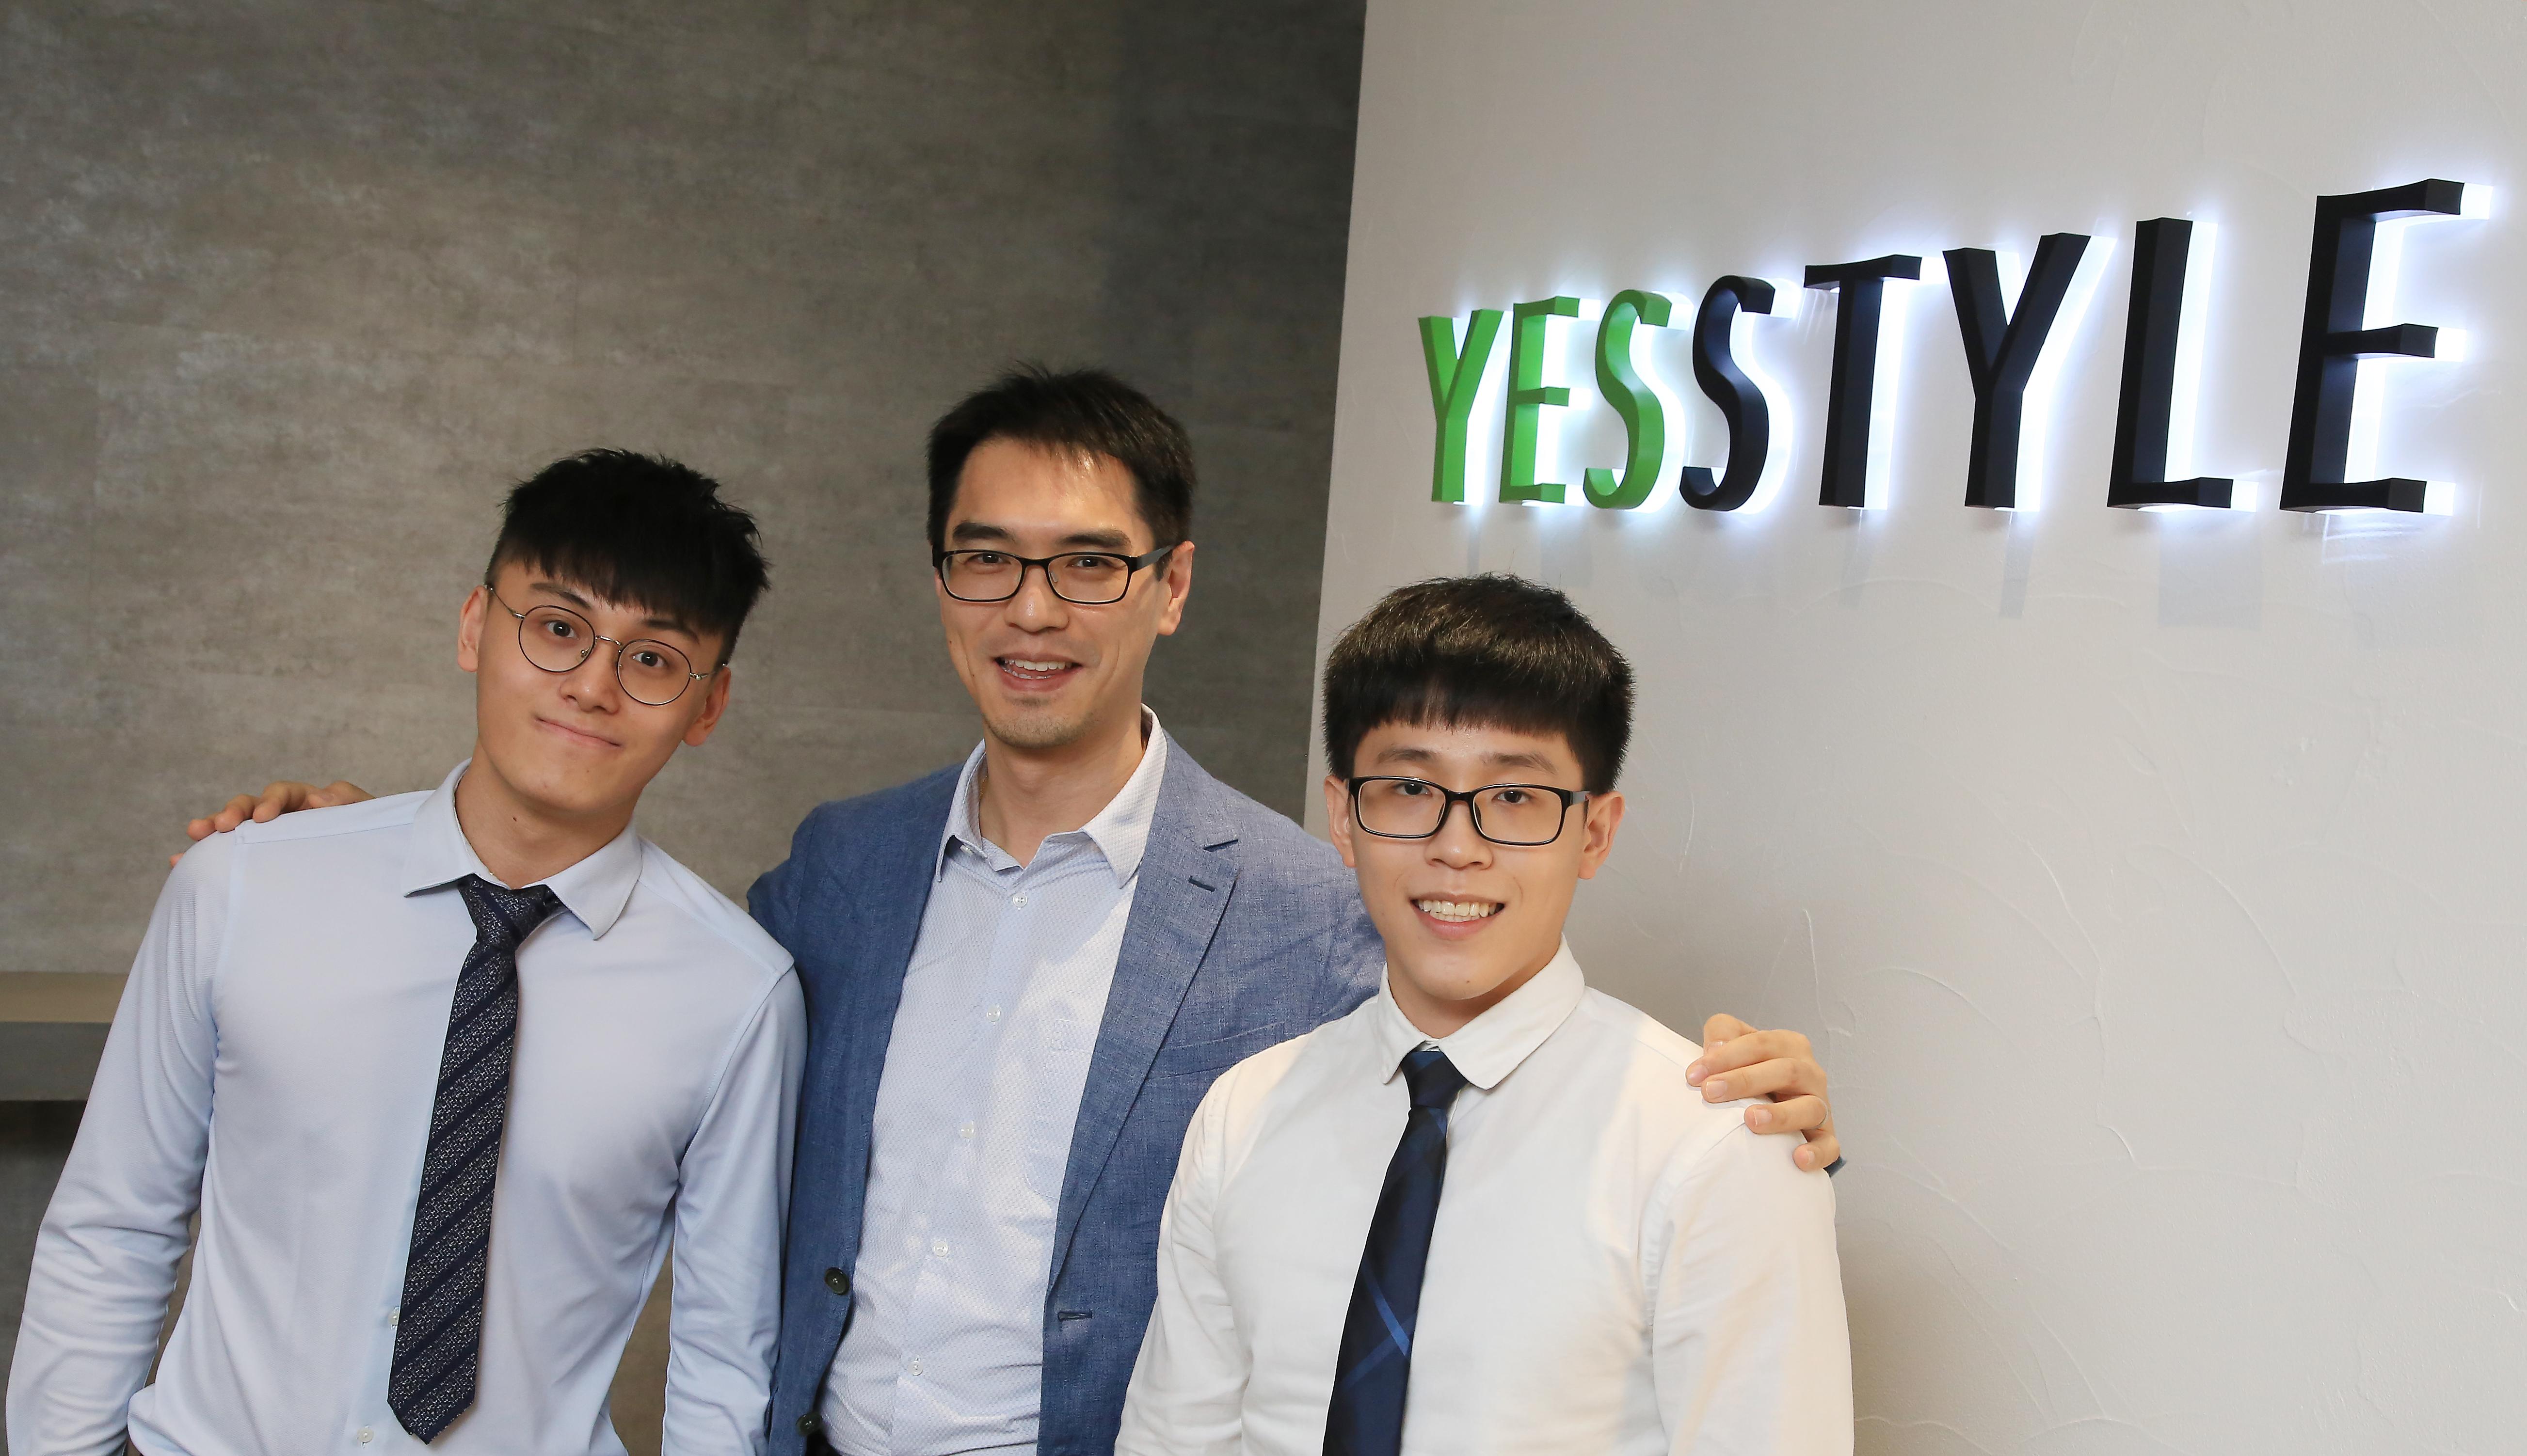 FutureNow’s founder and chief executive Raymond YEUNG was extremely impressed with the performance of HKUST interns.